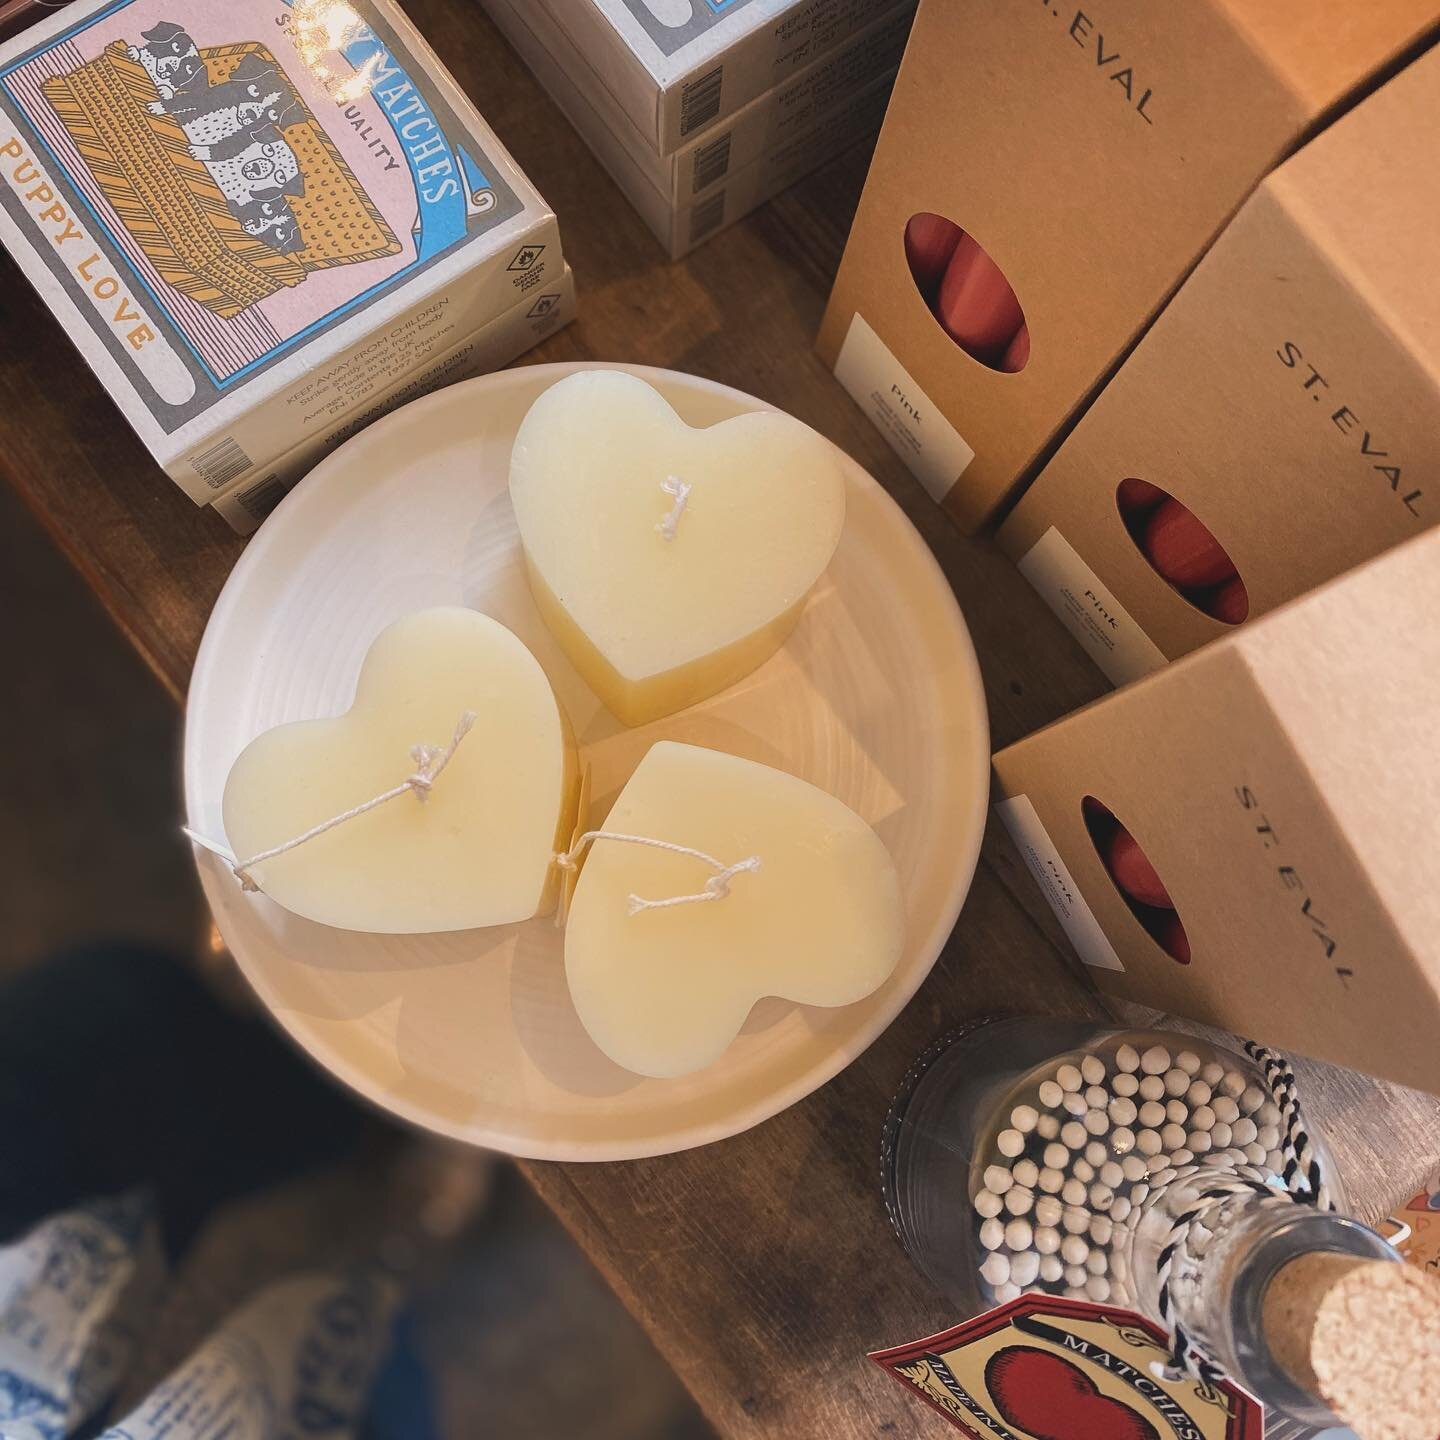 Little tokens of love 💕 

For your loved ones, or just for you.

#thekandletree #gloucester #shopindependent